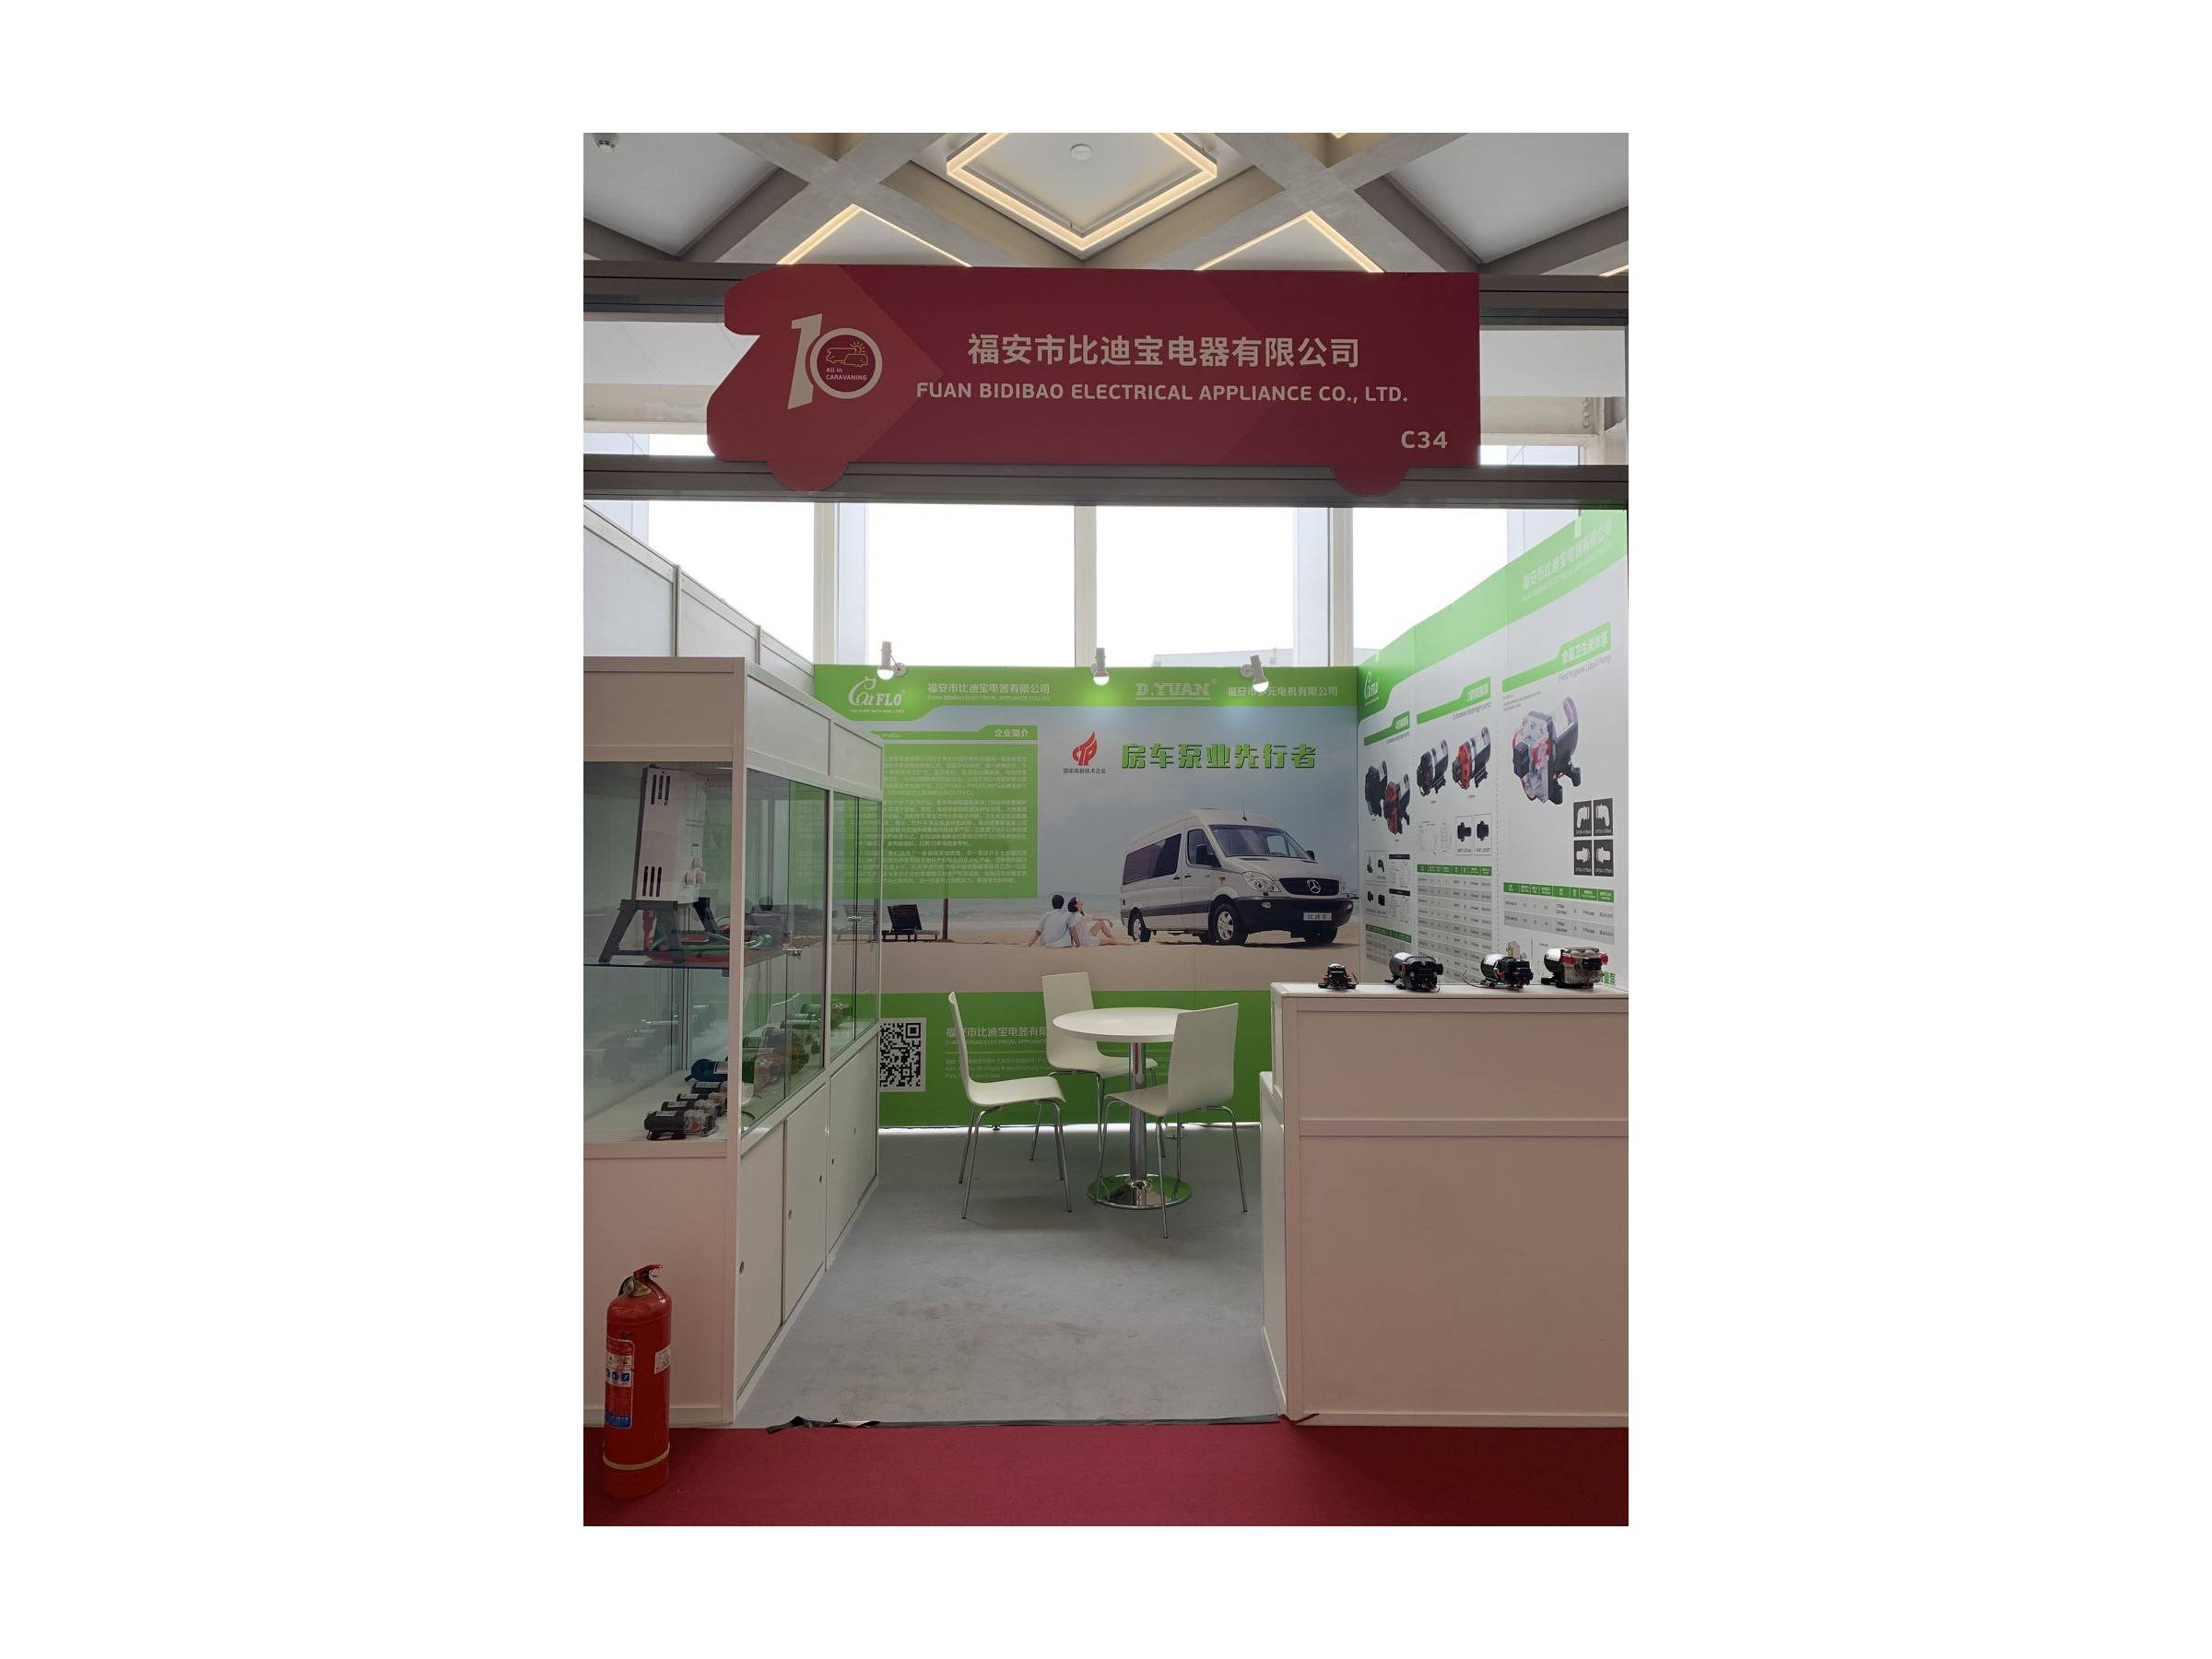 Catflo attends All in CARAVANING ( AIC ) Trade Fair in China